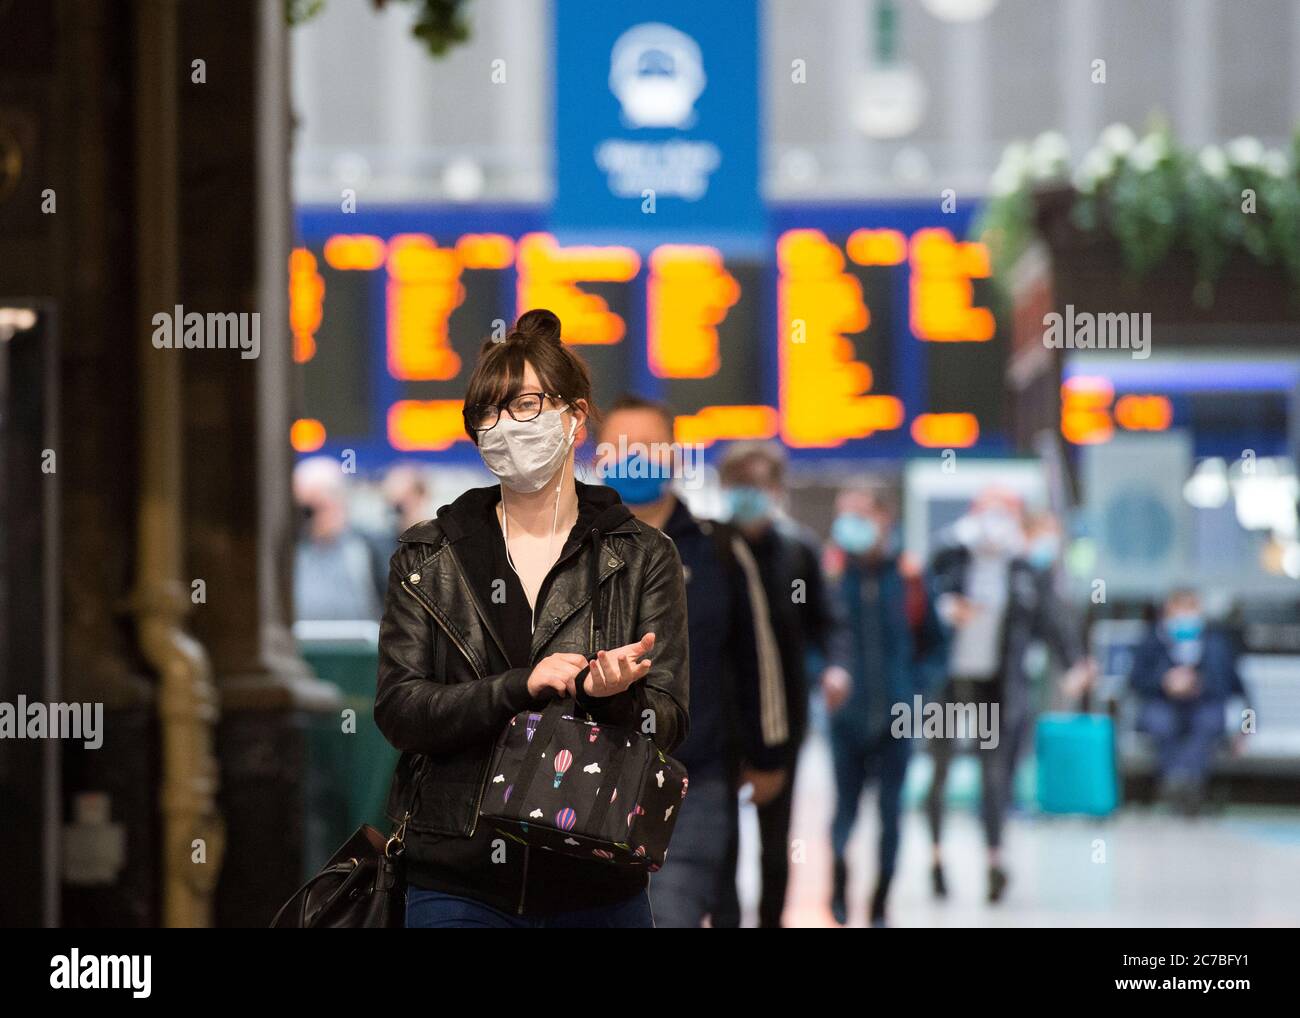 Glasgow, Scotland, UK. 16th July, 2020. Pictured: People wearing face masks and face coverings during their daily train commute at Central Station in the city centre. The Scottish Government made it mandatory that face coverings are worn when travelling on public transport in Scotland to help prevent the spread of coronavirus. Credit: Colin Fisher/Alamy Live News Stock Photo